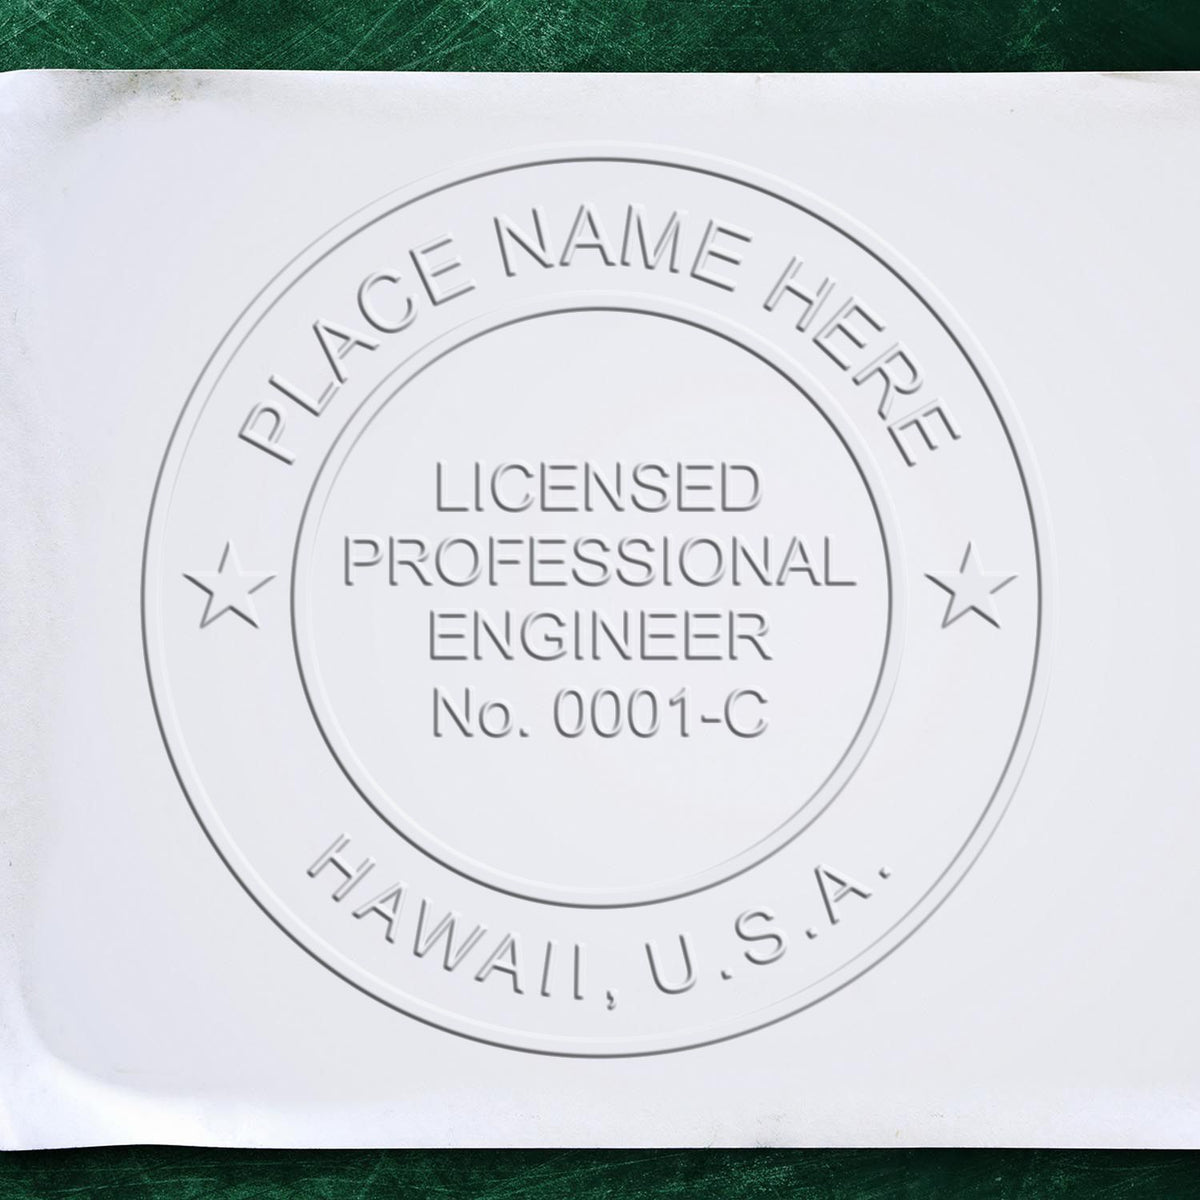 A photograph of the Hawaii Engineer Desk Seal stamp impression reveals a vivid, professional image of the on paper.